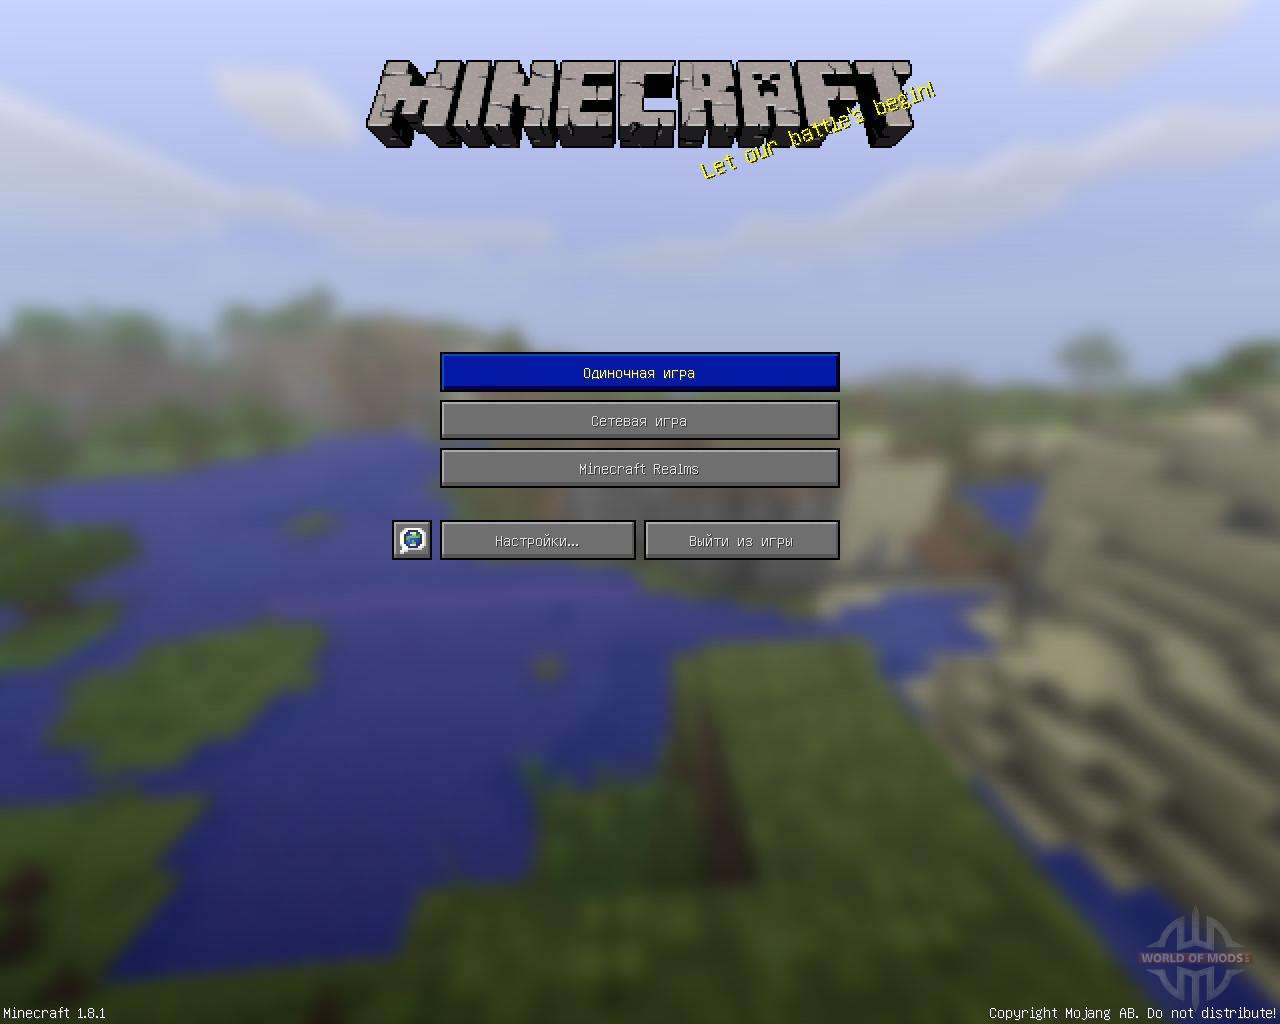 minecraft resource pack clear glass 1.14